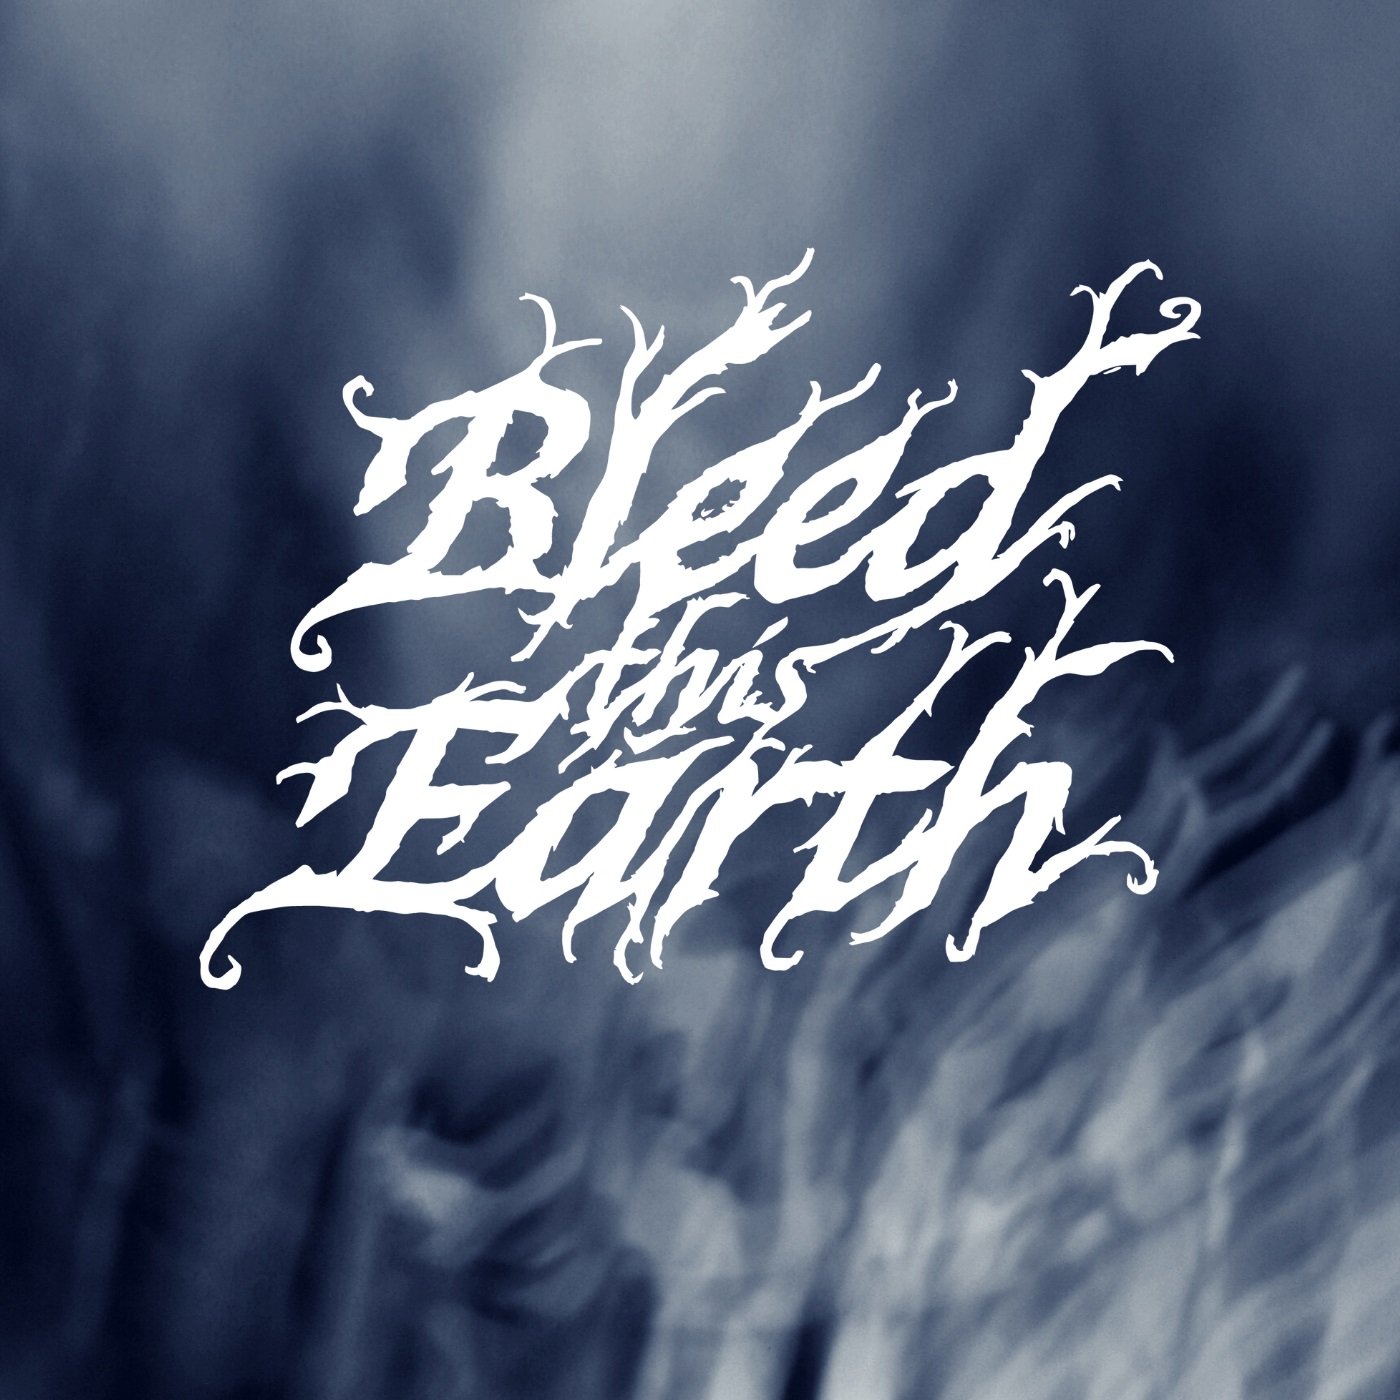 Waste away. Bleed this Earth. Bleed away. This Earth.